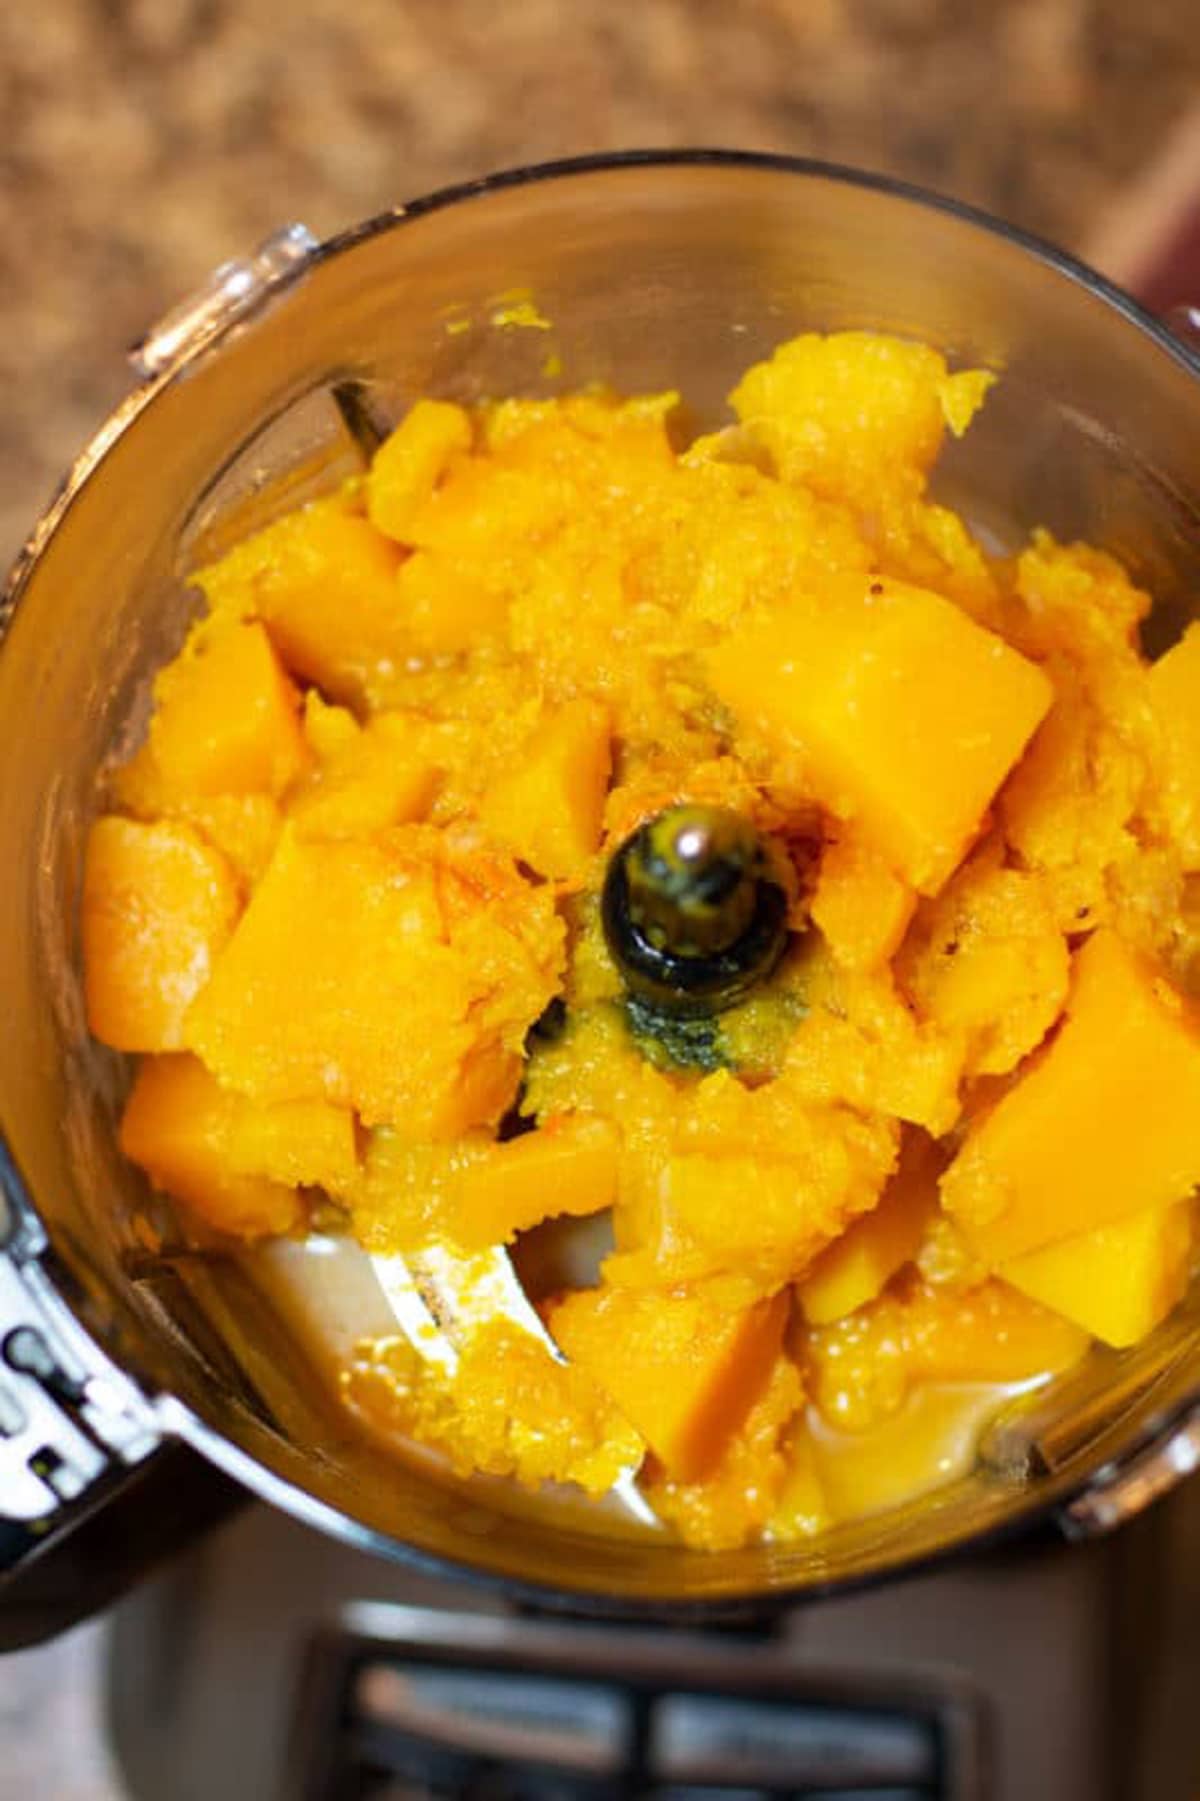 Cooked butternut squash in a food processor.